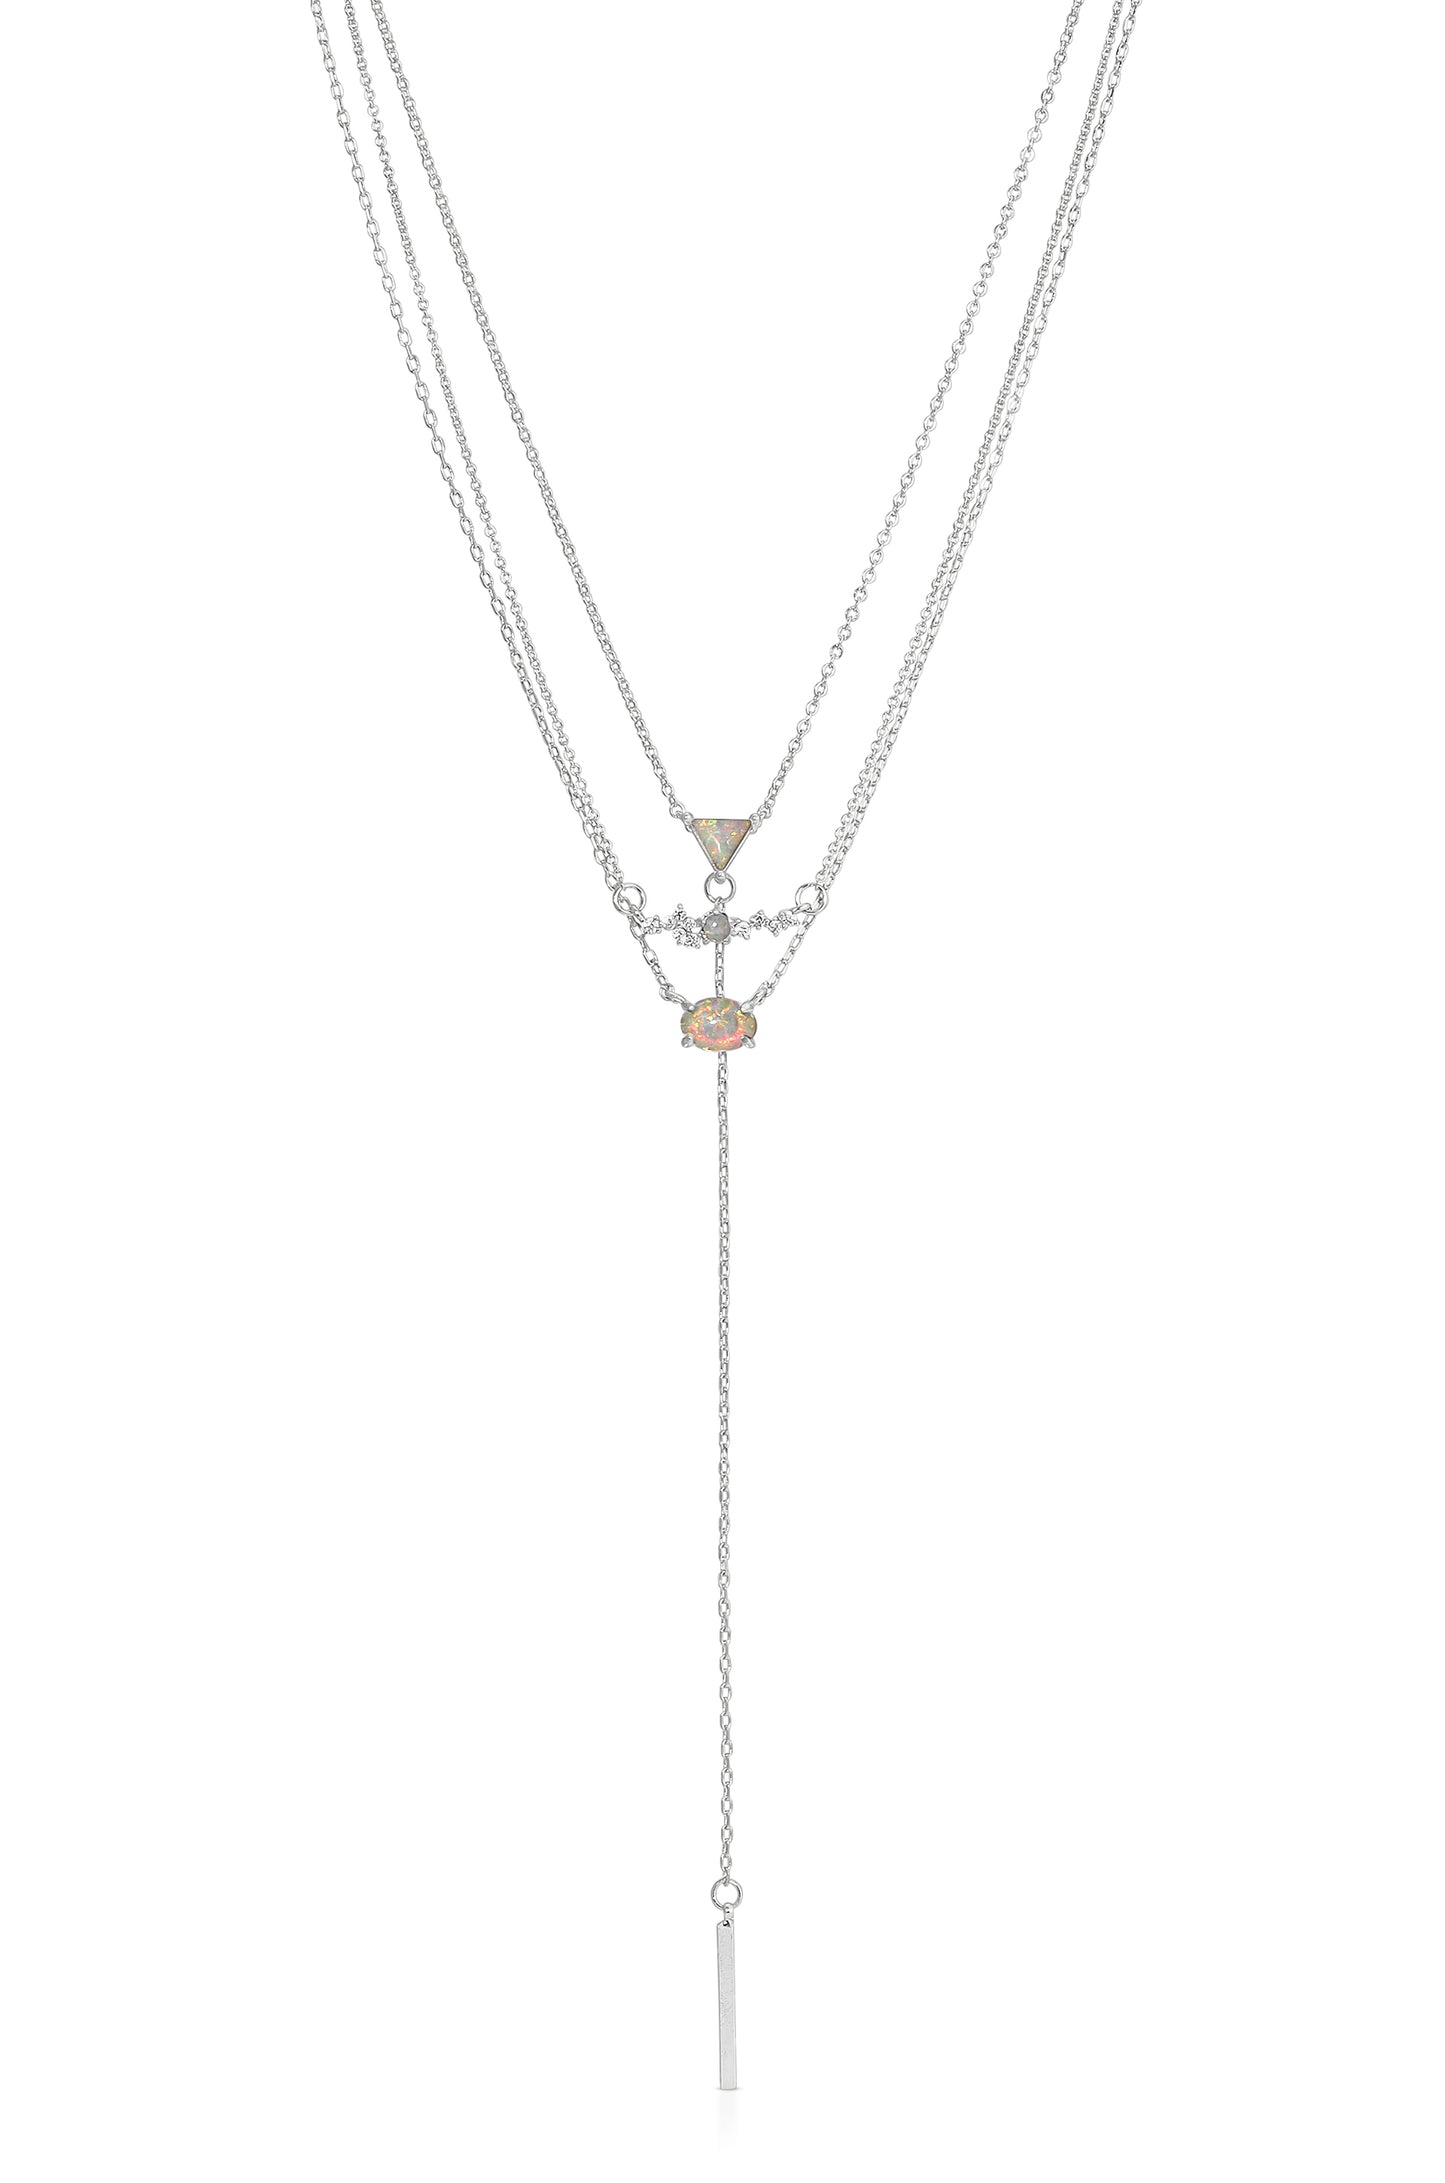 Layered Opal Lariat Necklace Set of 3 in rhodium close up